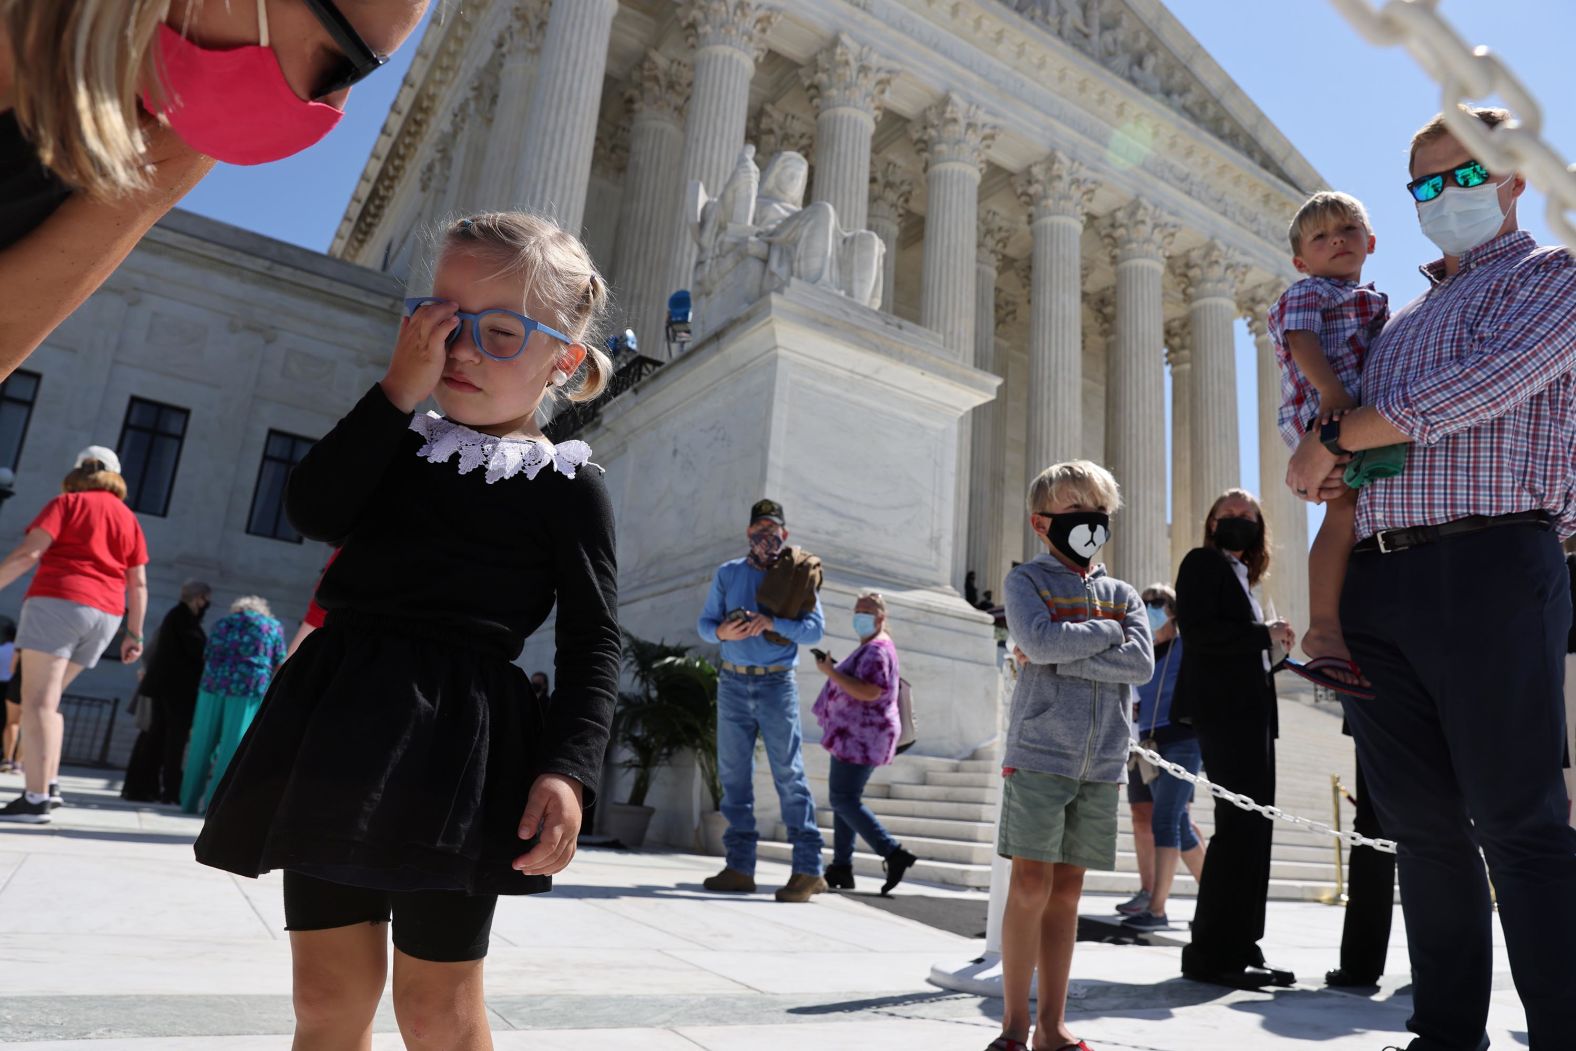 Lucille Wilson, 3, stands outside the Supreme Court dressed as Justice Ginsburg.